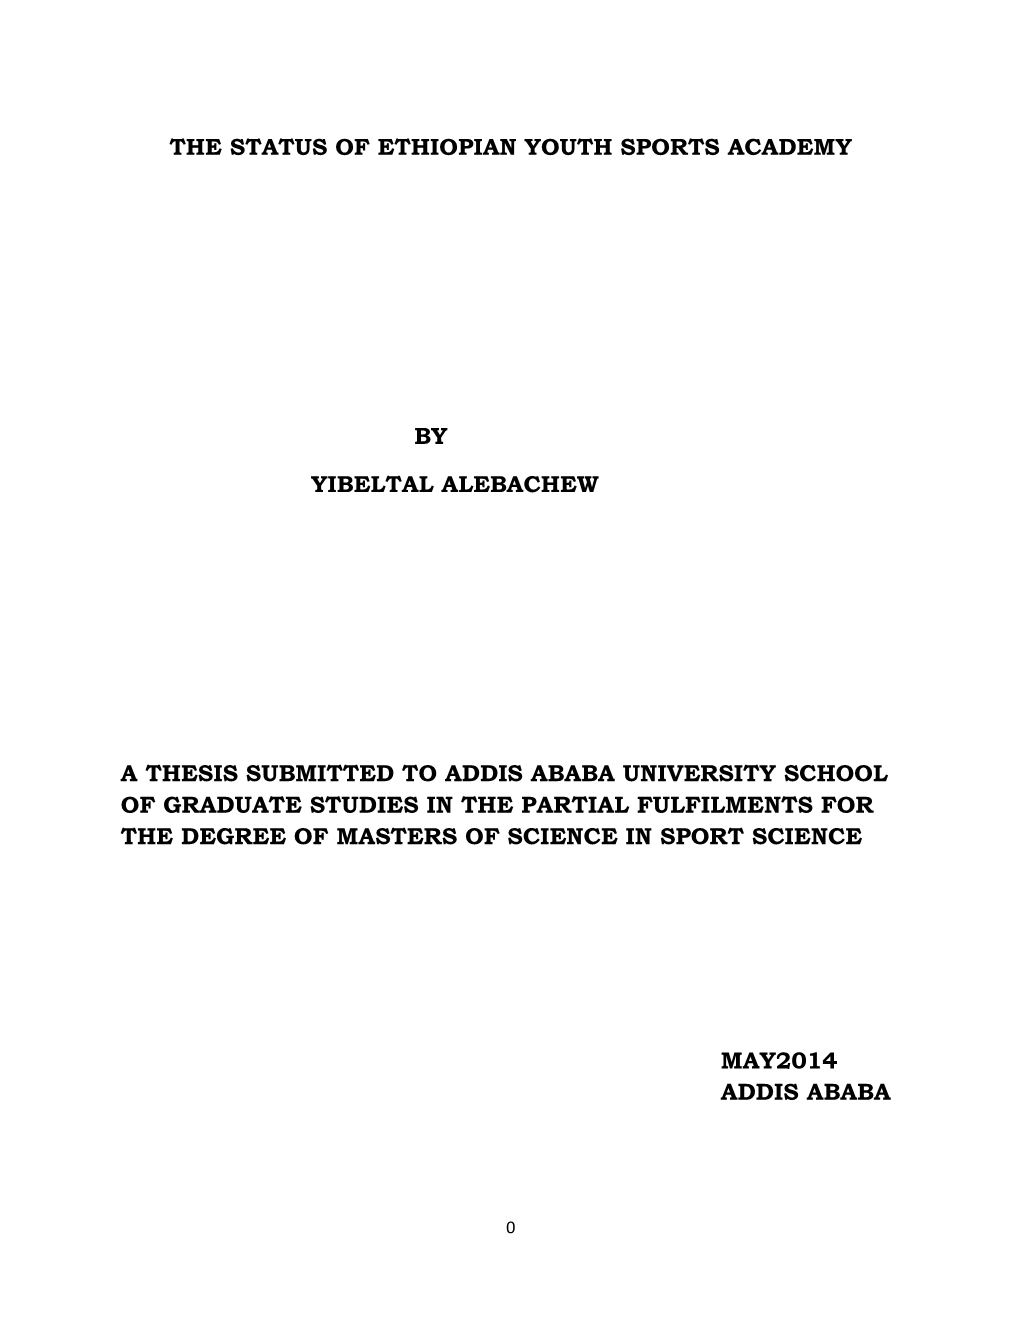 The Status of Ethiopian Youth Sports Academy by Yibeltal Alebachew a Thesis Submitted to Addis Ababa University School of Gradua